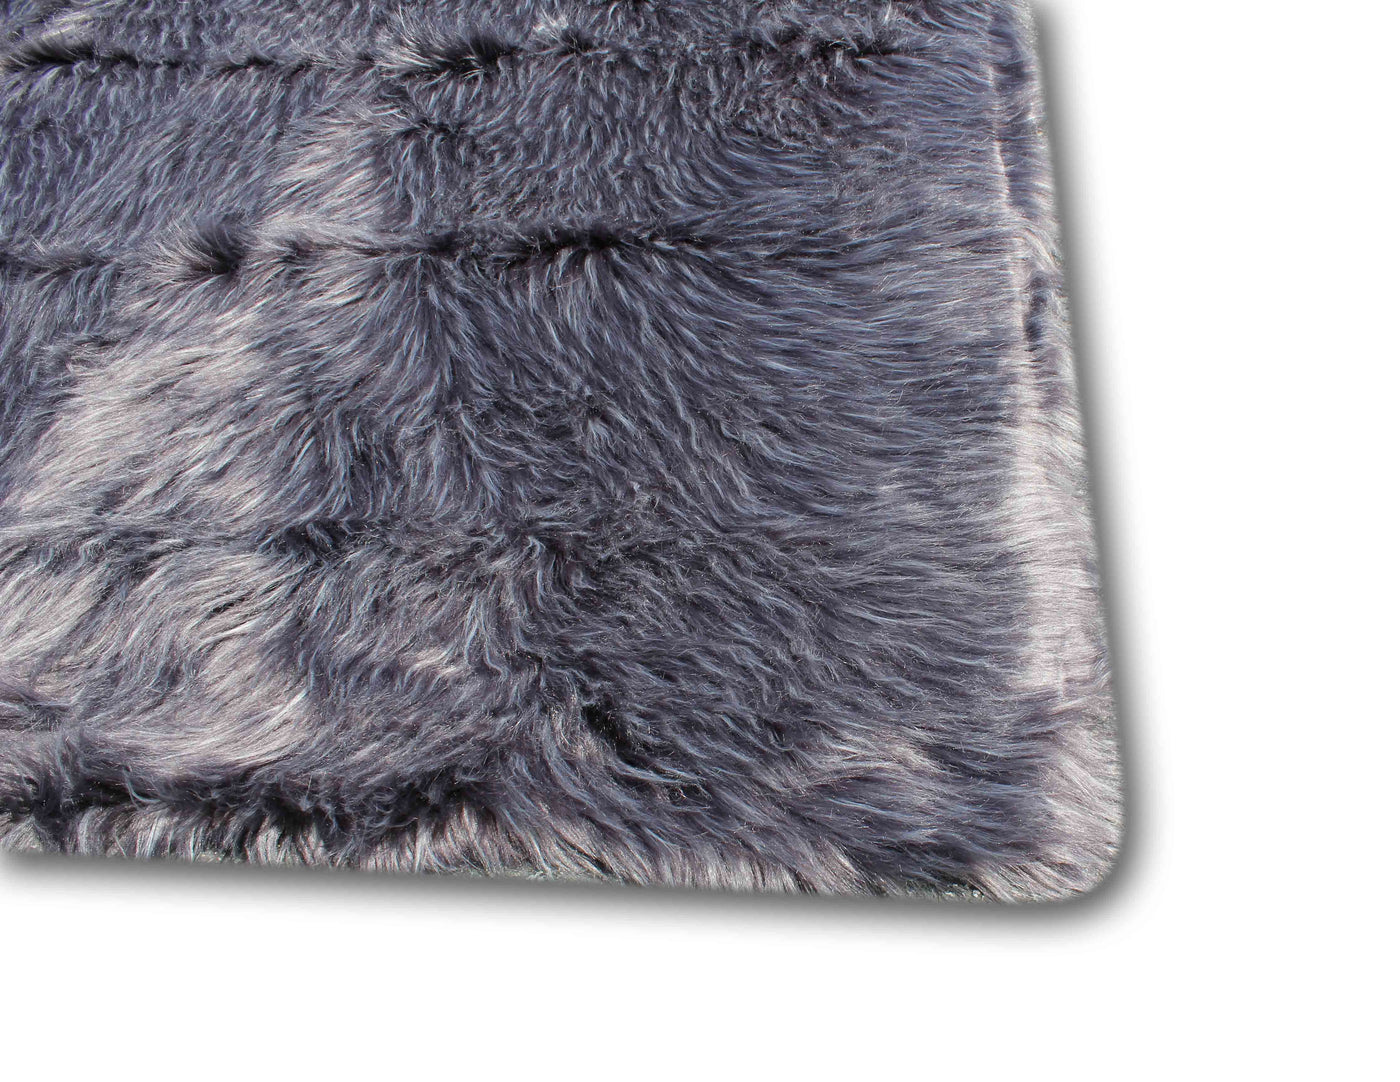 Modern Fox Faux Fur Luxury Area Rug Appx. 3" Pile Height by Rug Factory Plus - Rug Factory Plus